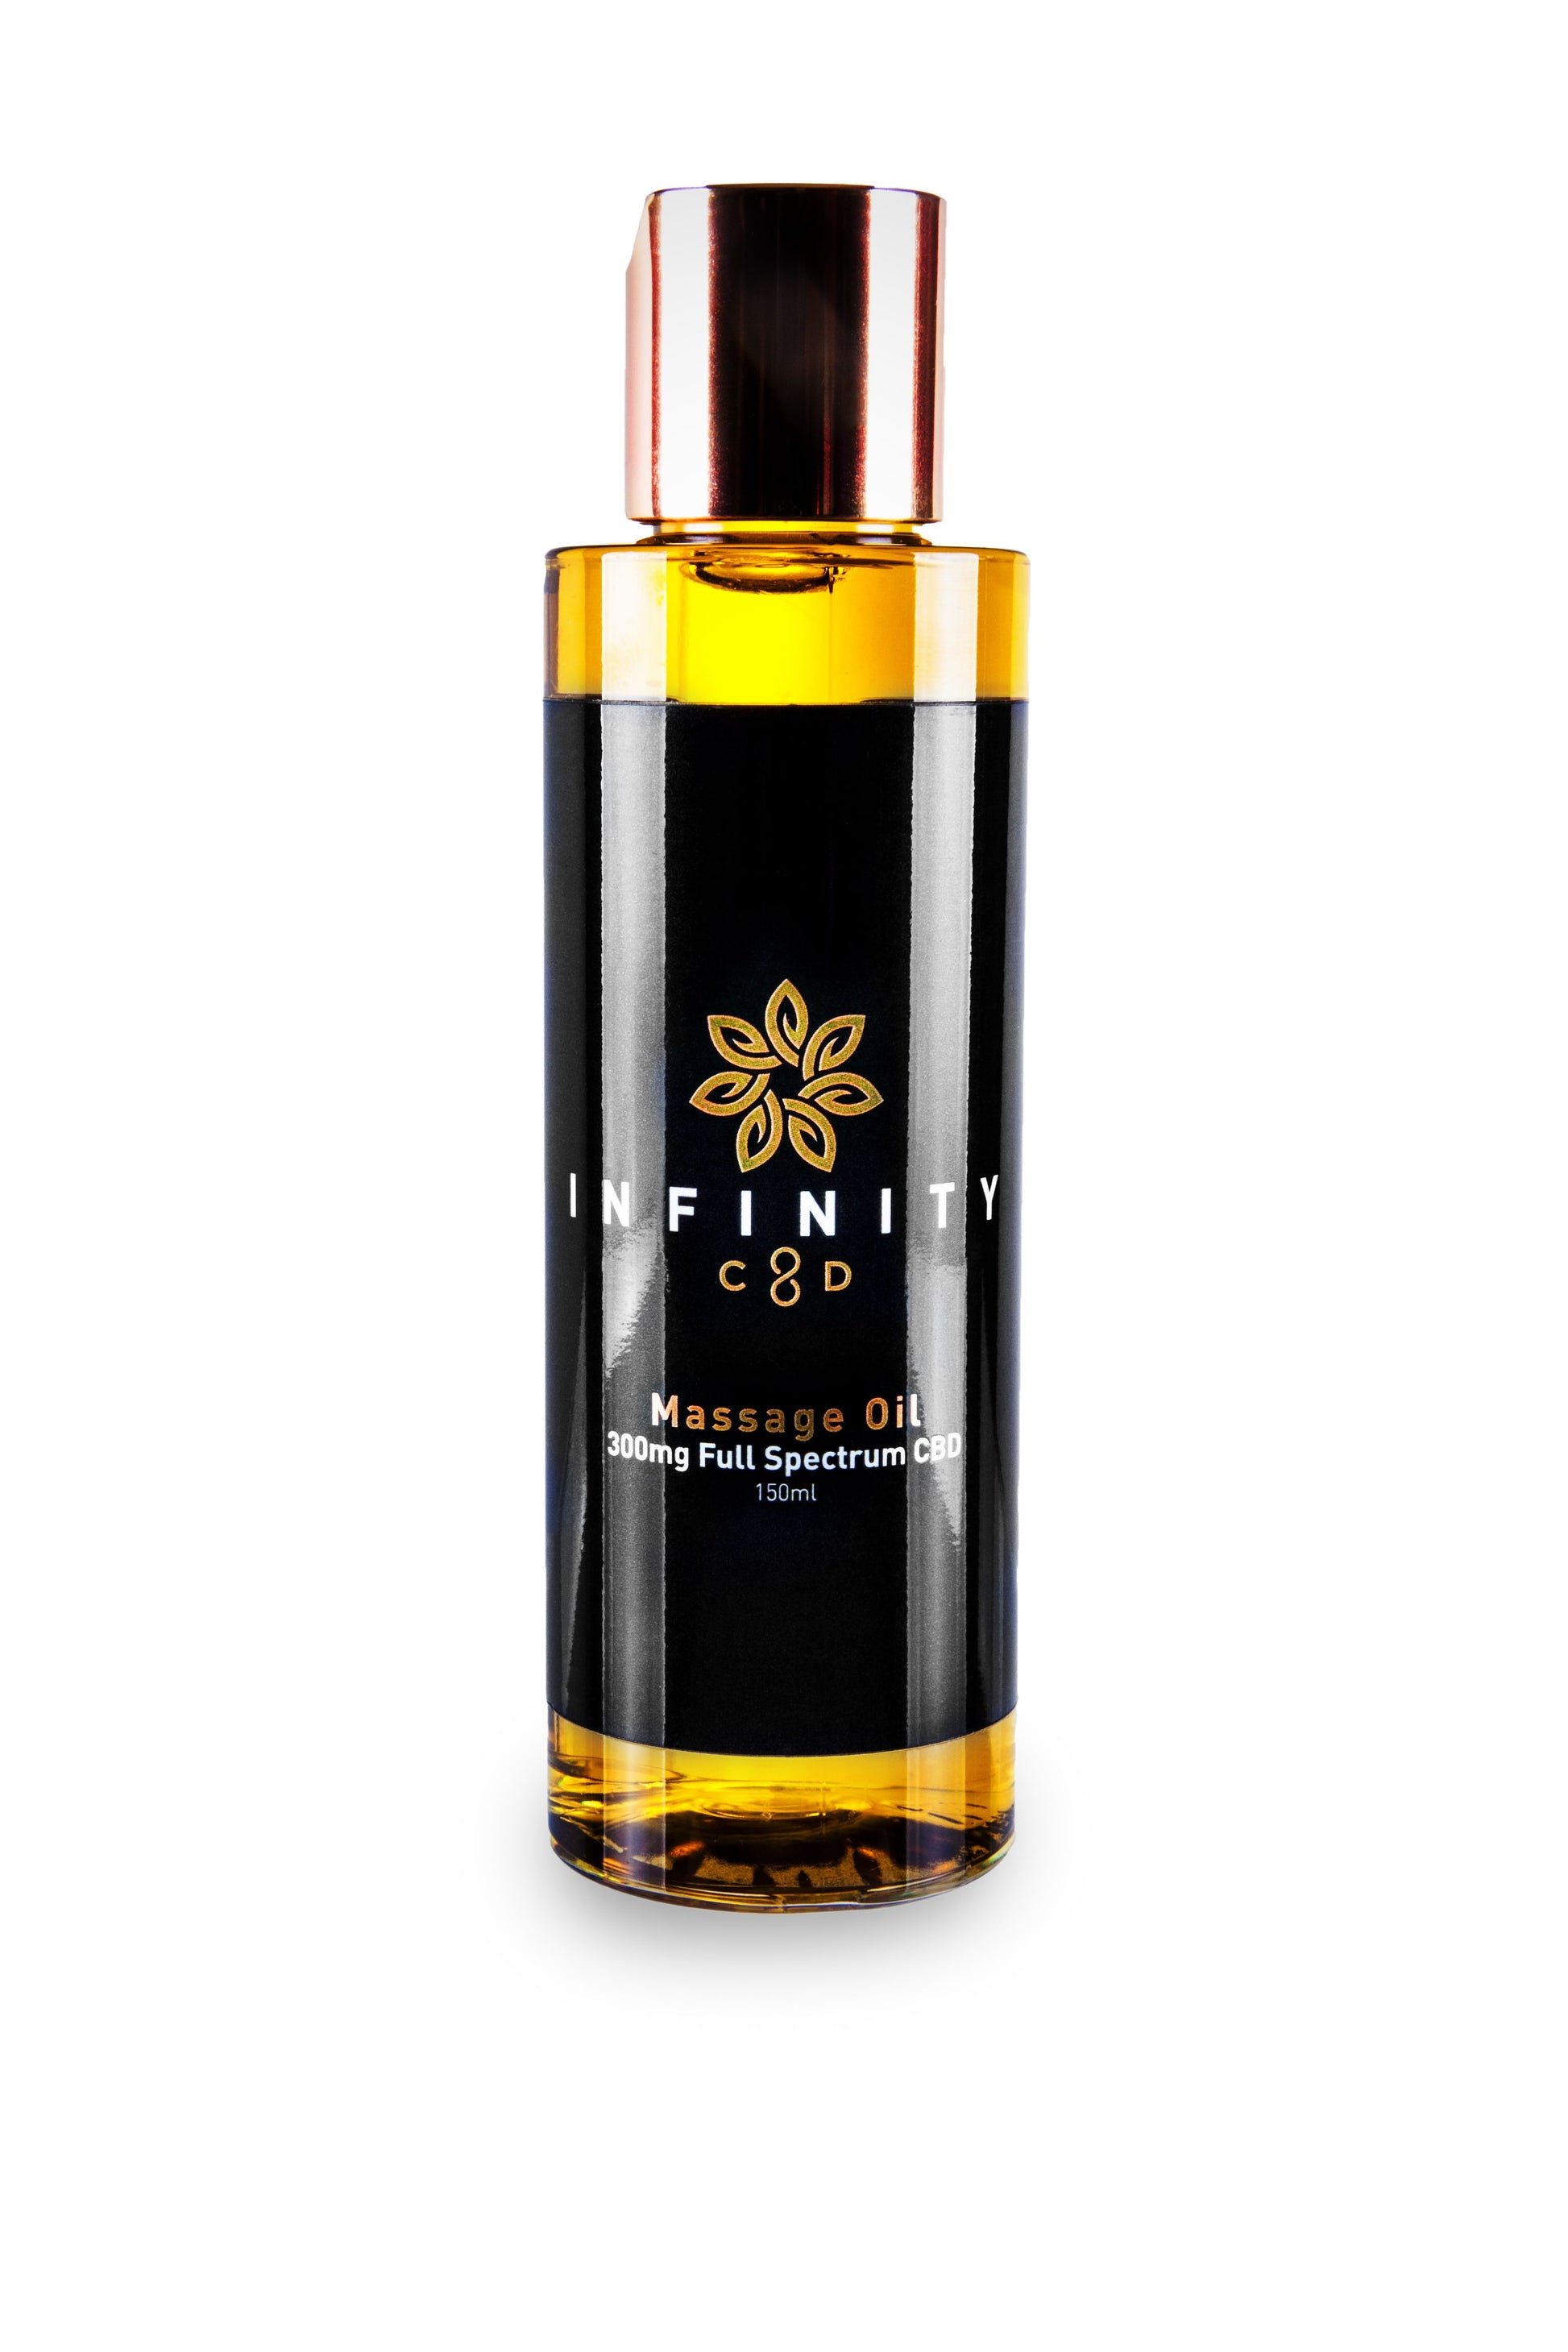 Massage Oil infused with CBD by Infinity CBD